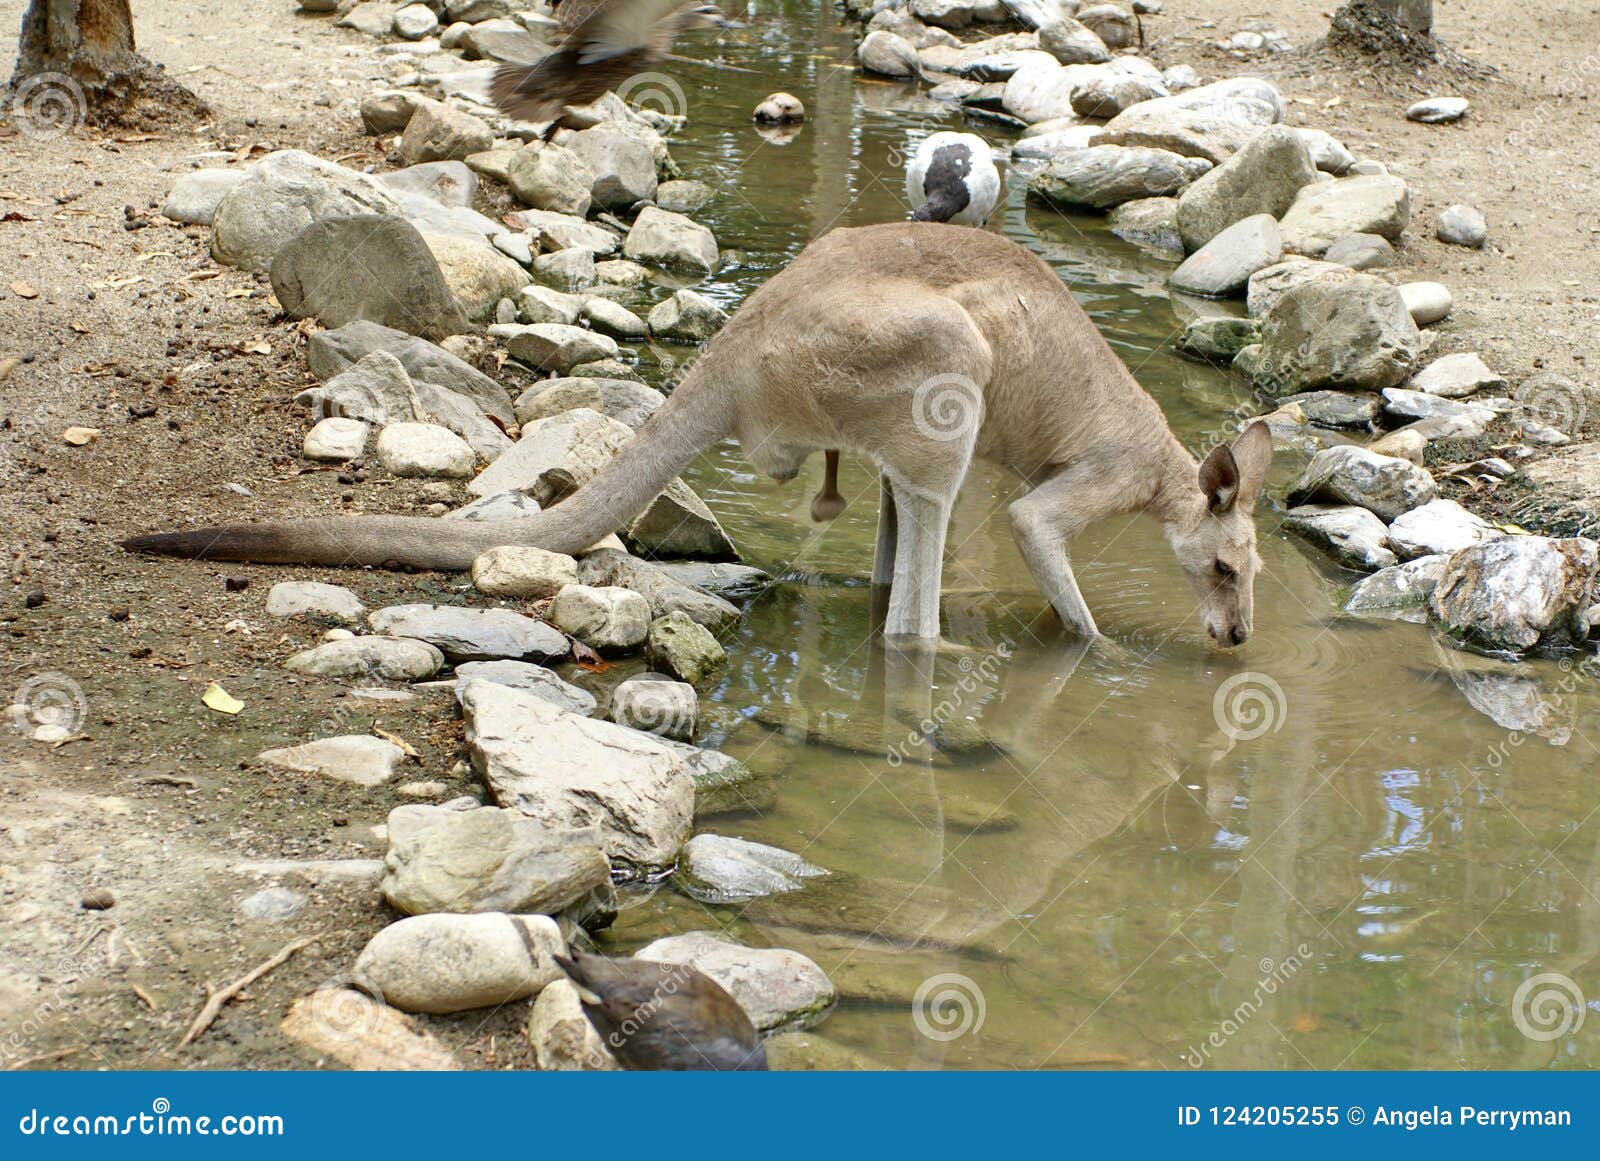 Male Kangaroo Drinking from a Stream Stock Image